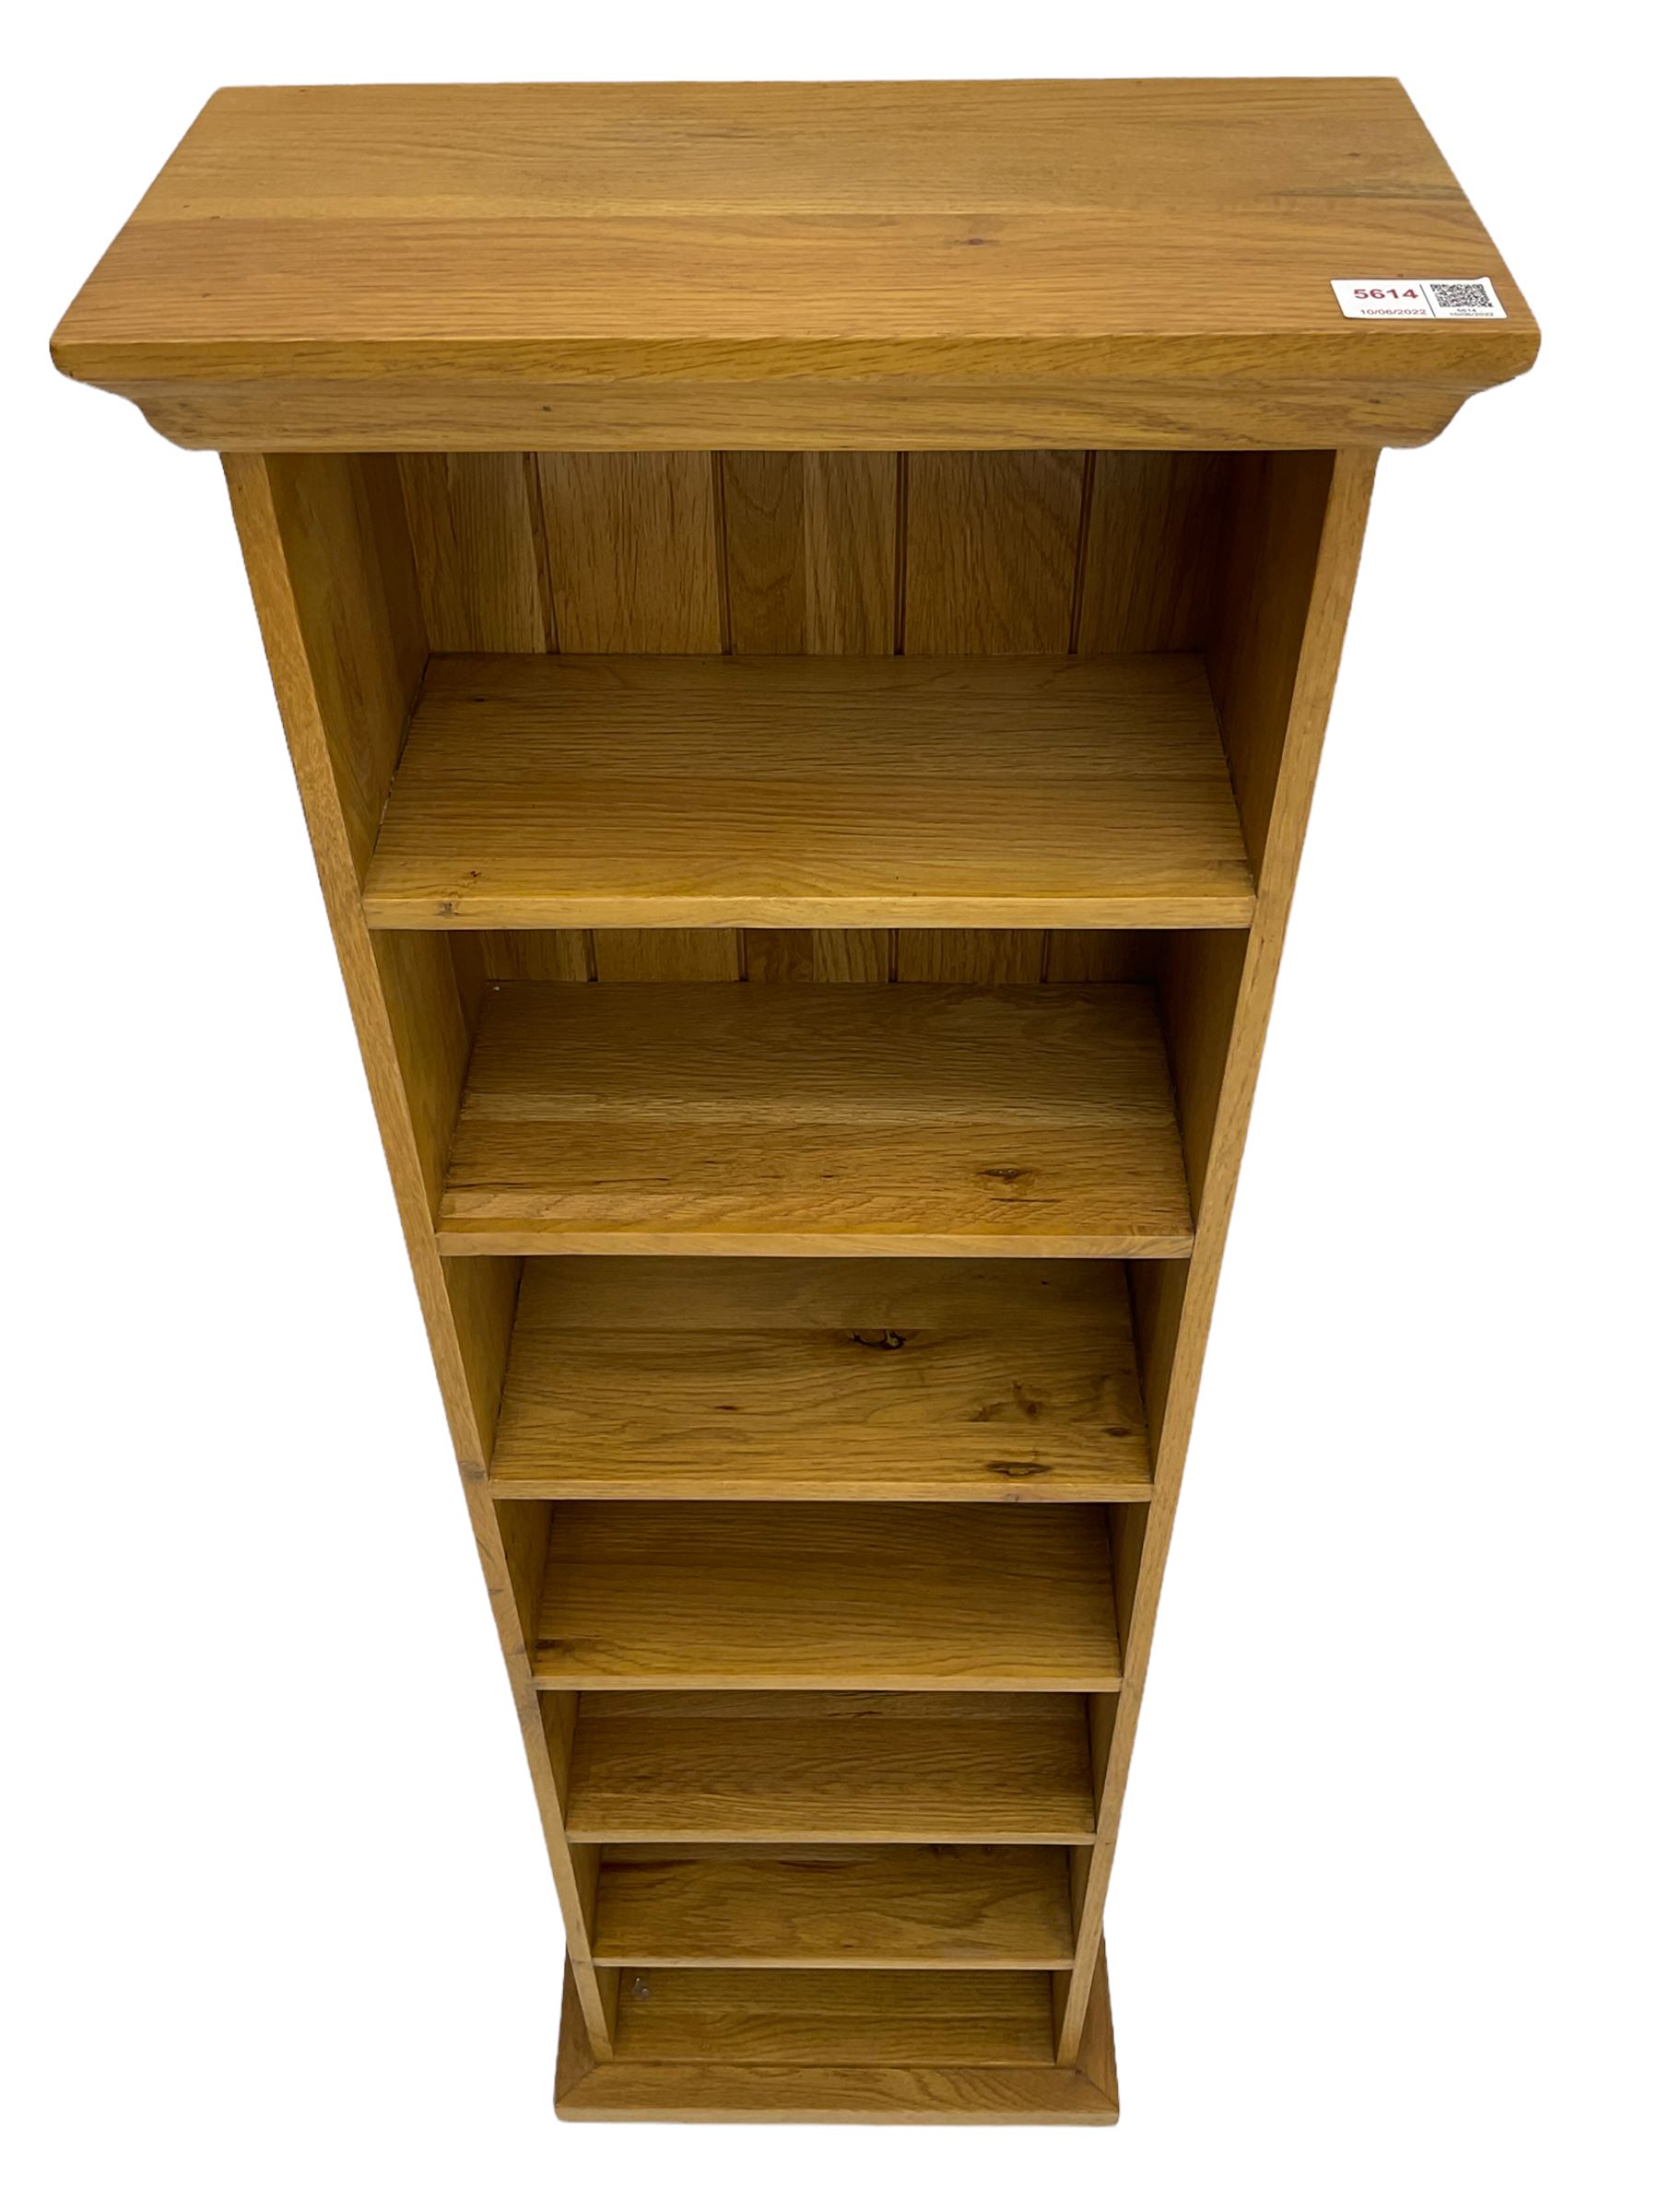 Small solid light oak open bookcase - Image 2 of 4